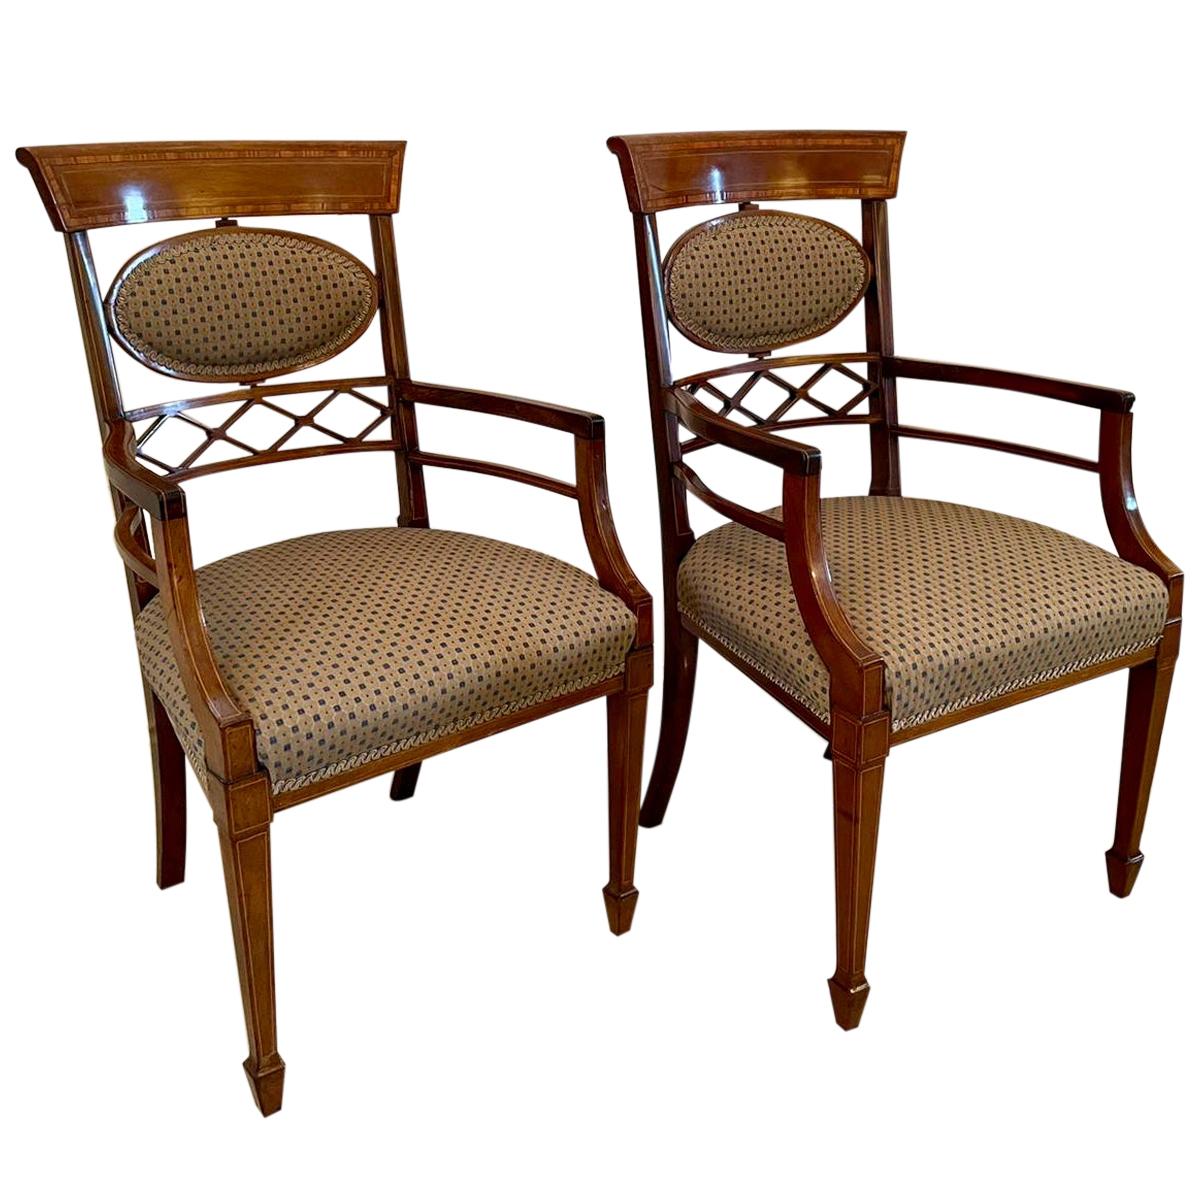 Pair of 19th Century Antique Victorian Mahogany Inlaid Desk Chairs